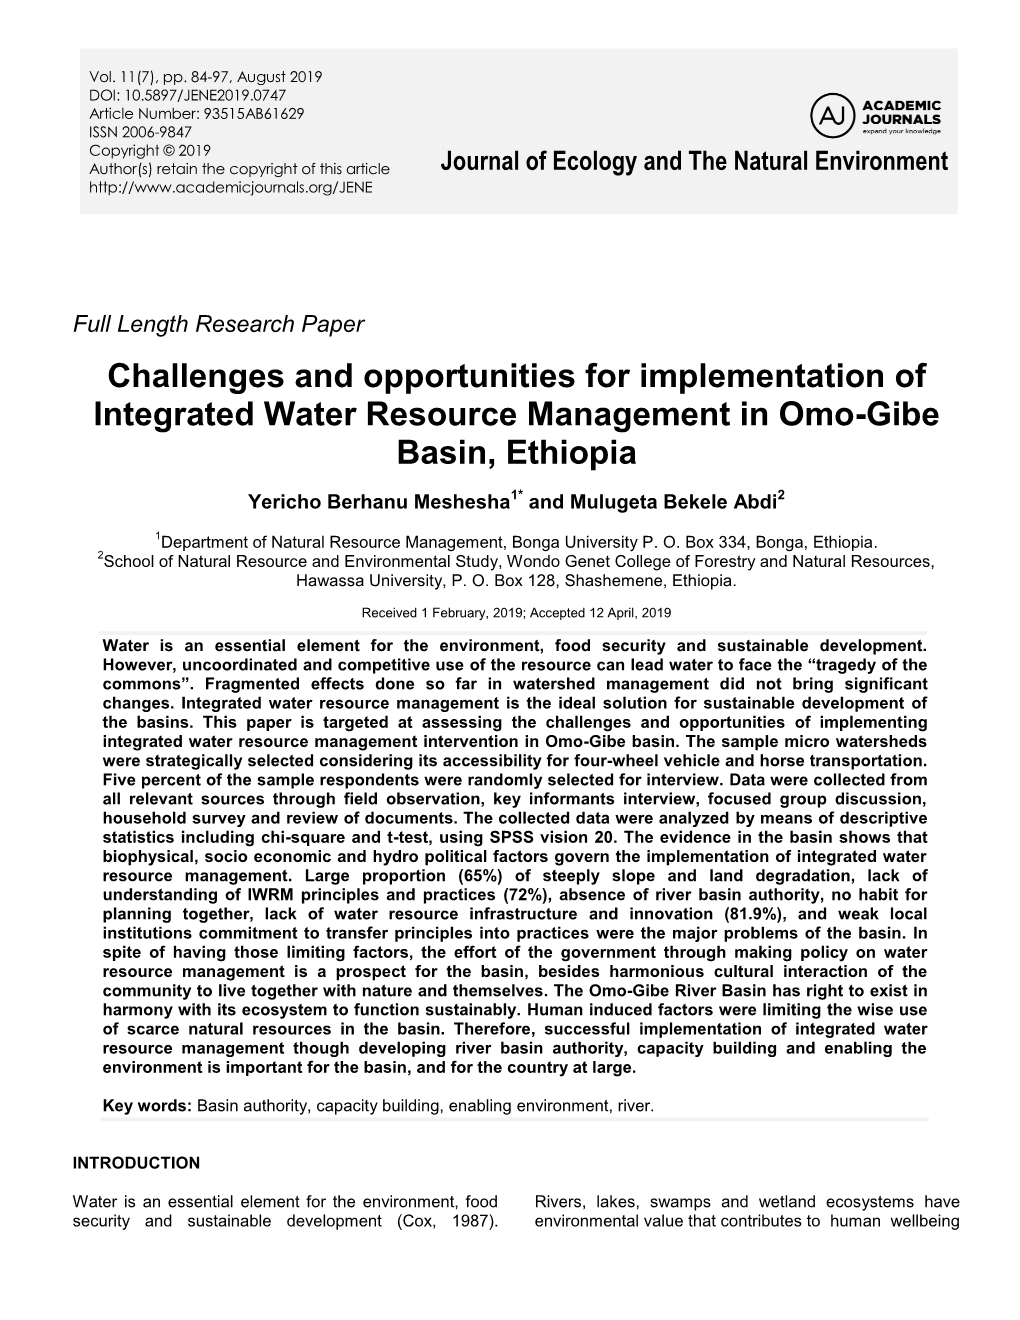 Challenges and Opportunities for Implementation of Integrated Water Resource Management in Omo-Gibe Basin, Ethiopia